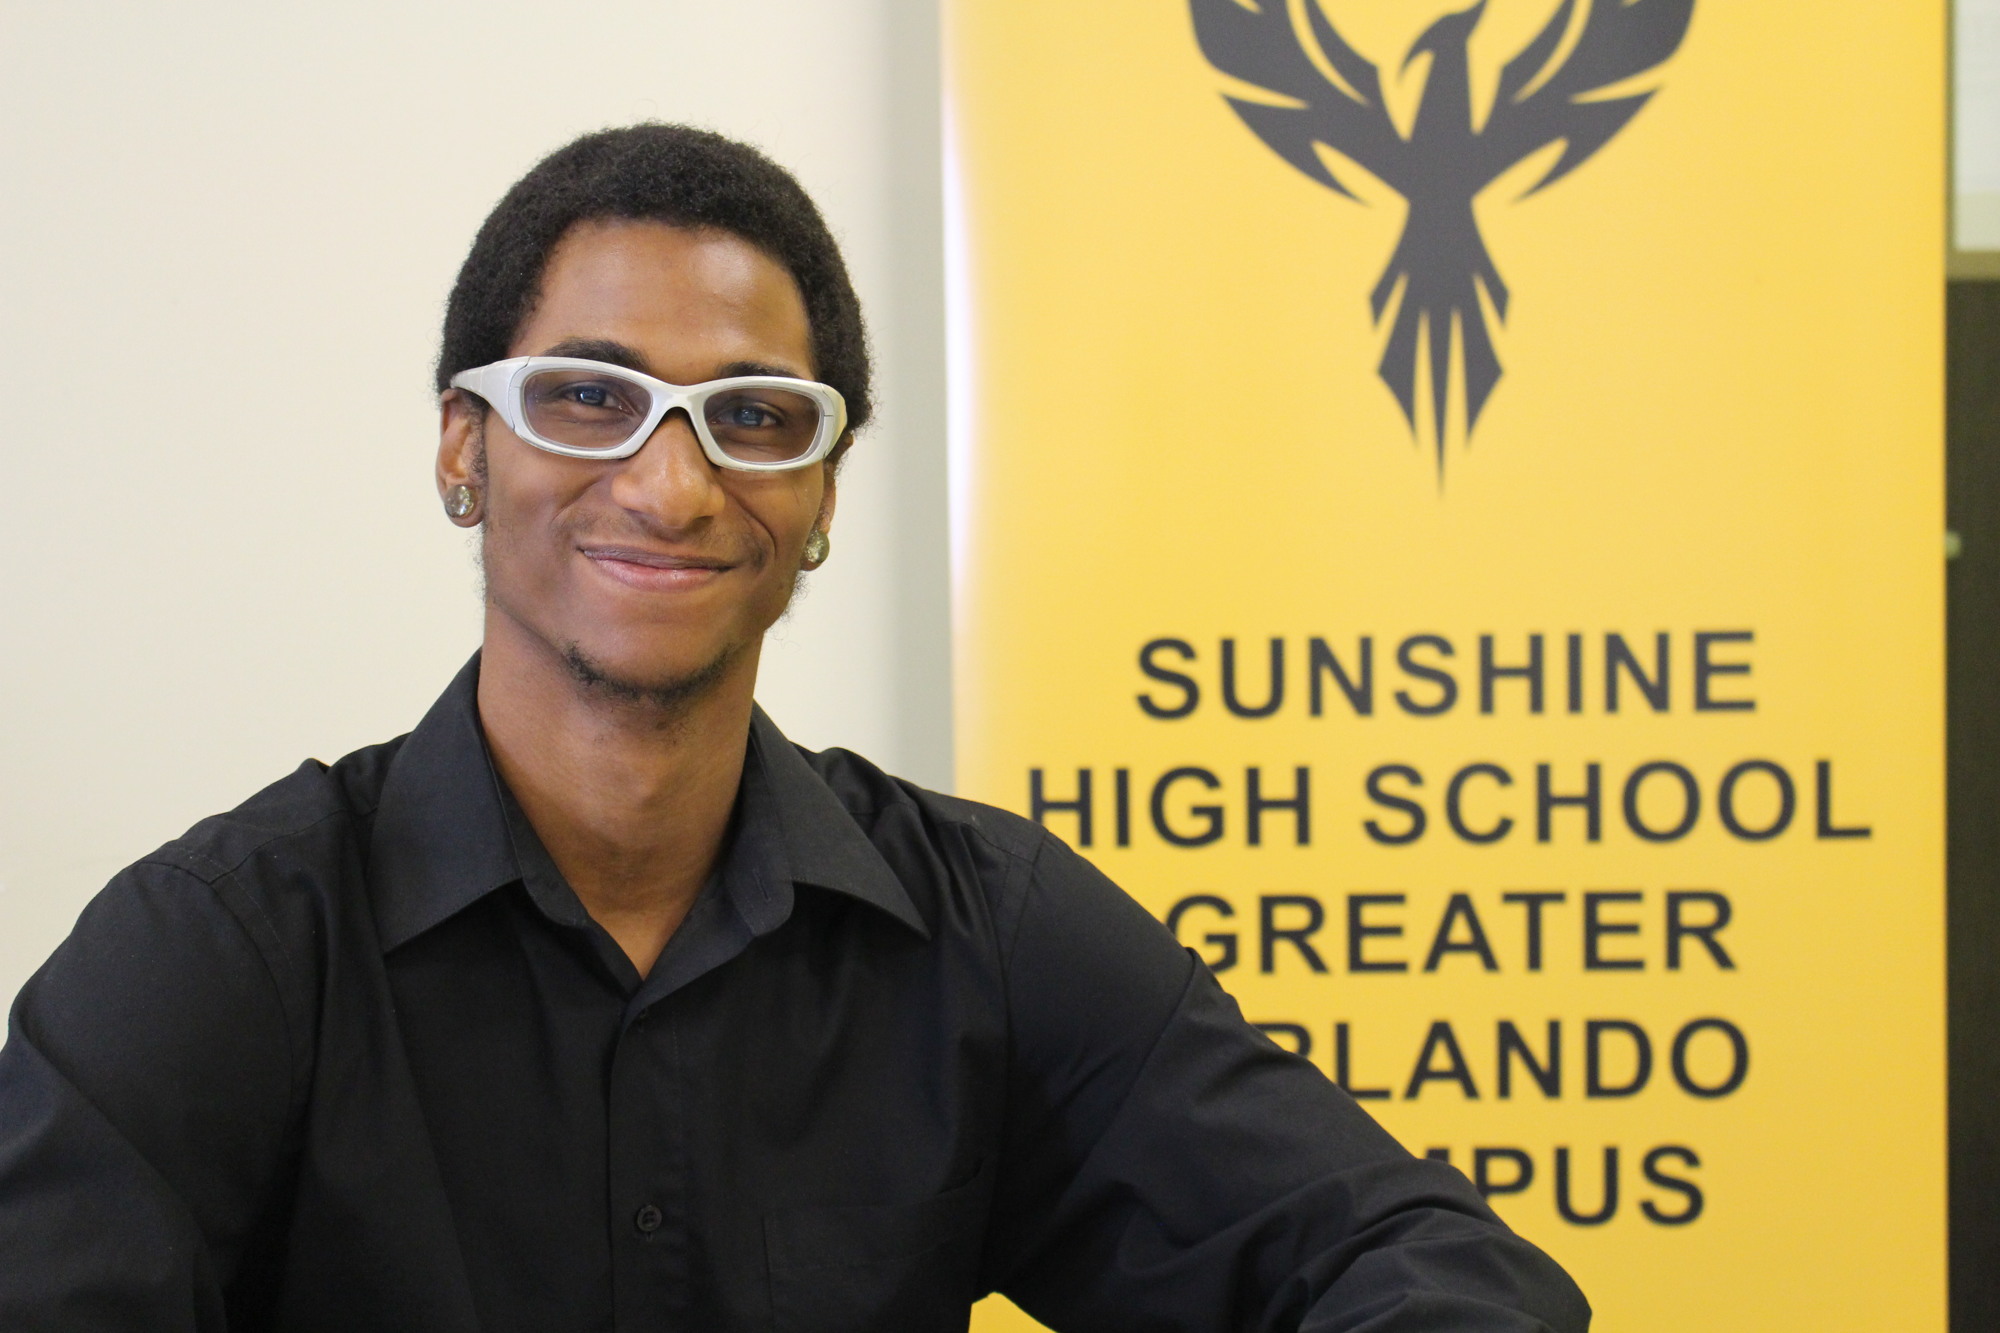 Shemuwel Russ graduated from Sunshine High at 18 after being home-schooled all his life. He now studies political science at Seminole State College.